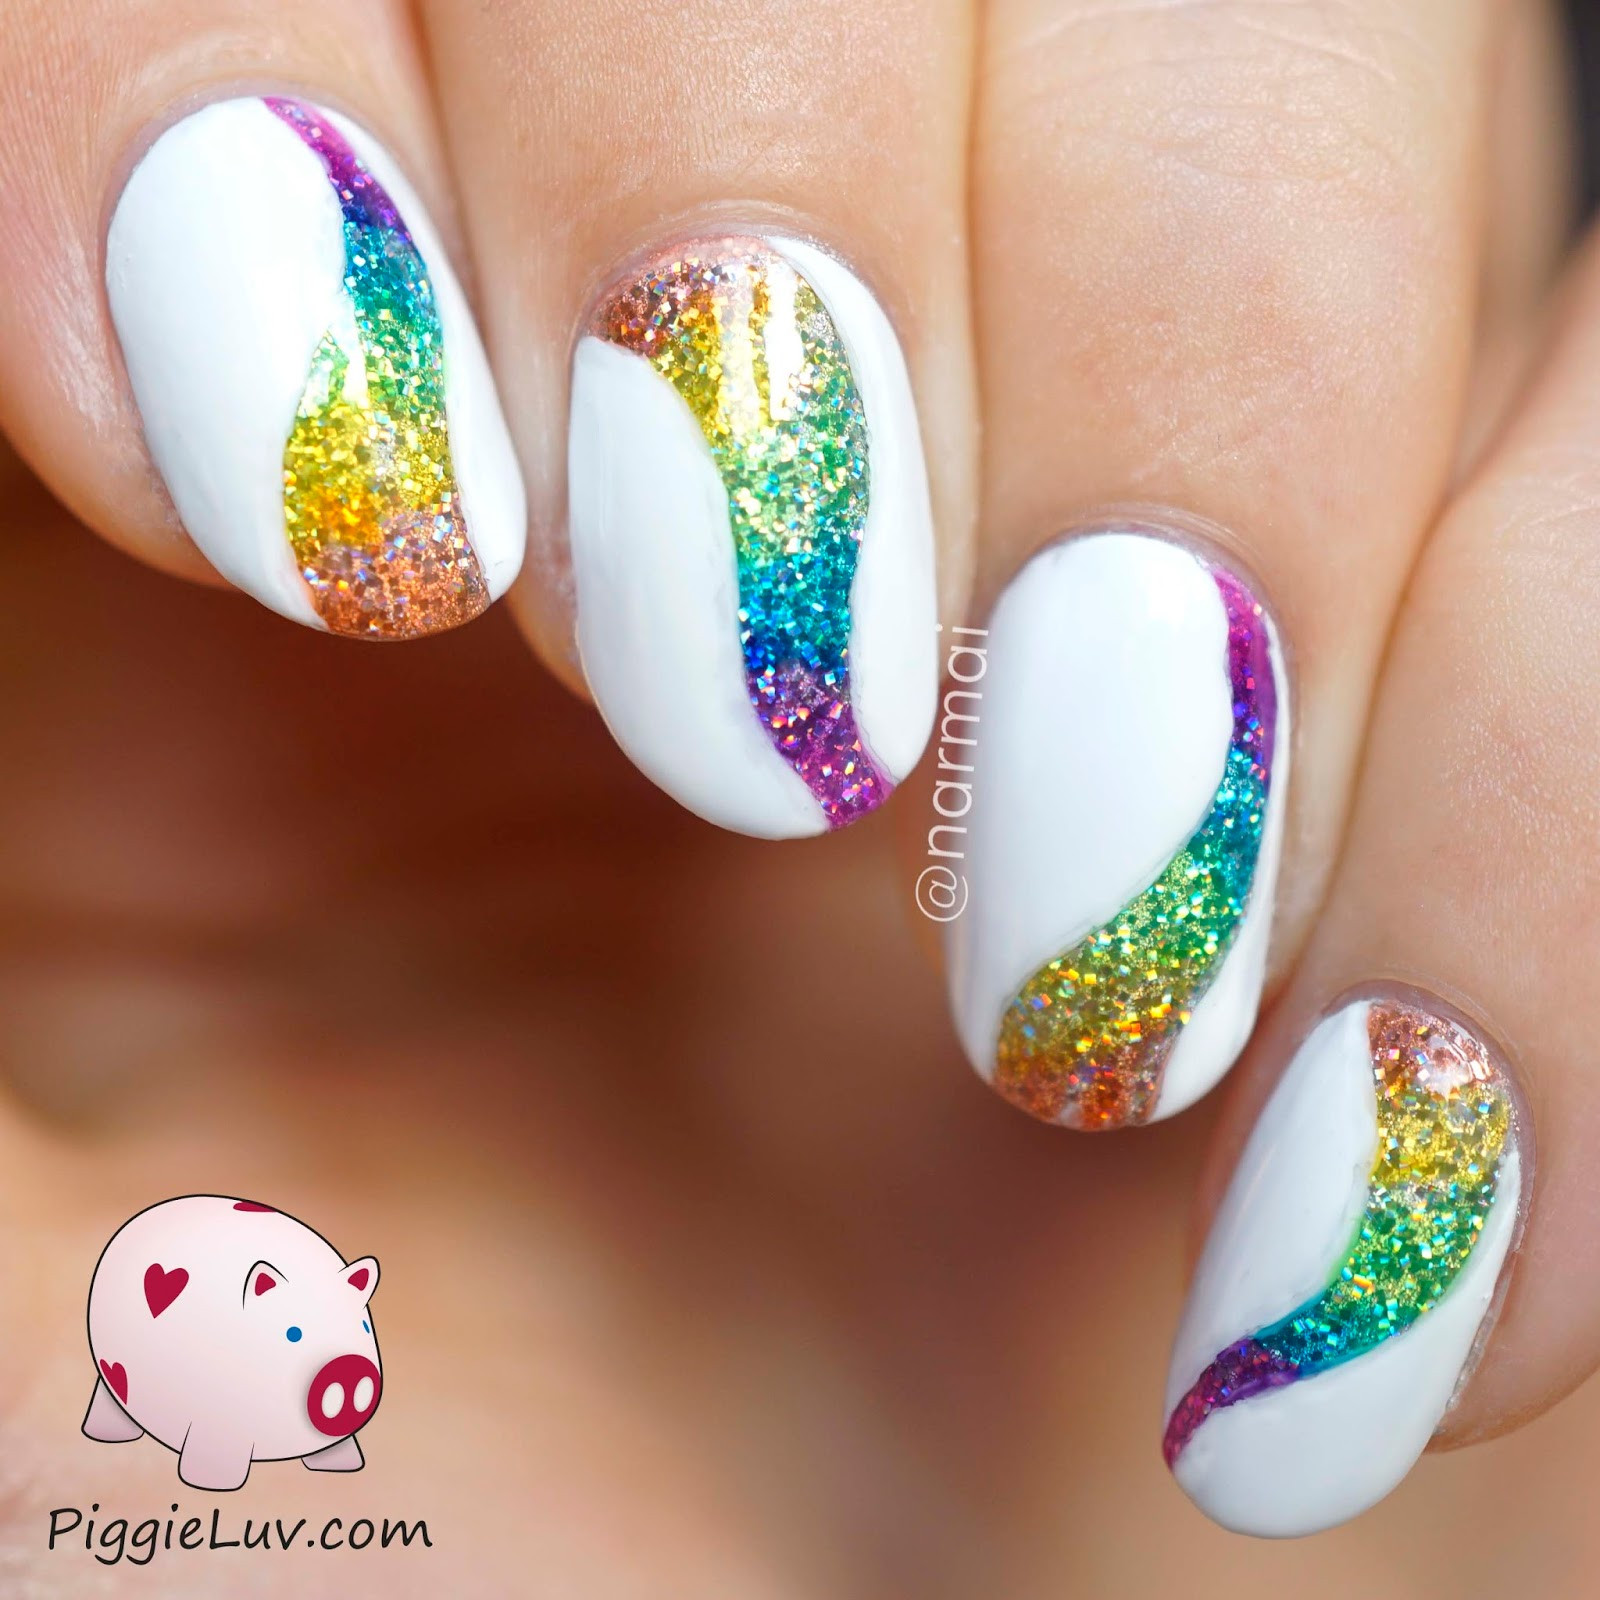 Nail Designs With Glitter
 white tip nail designs with glitter